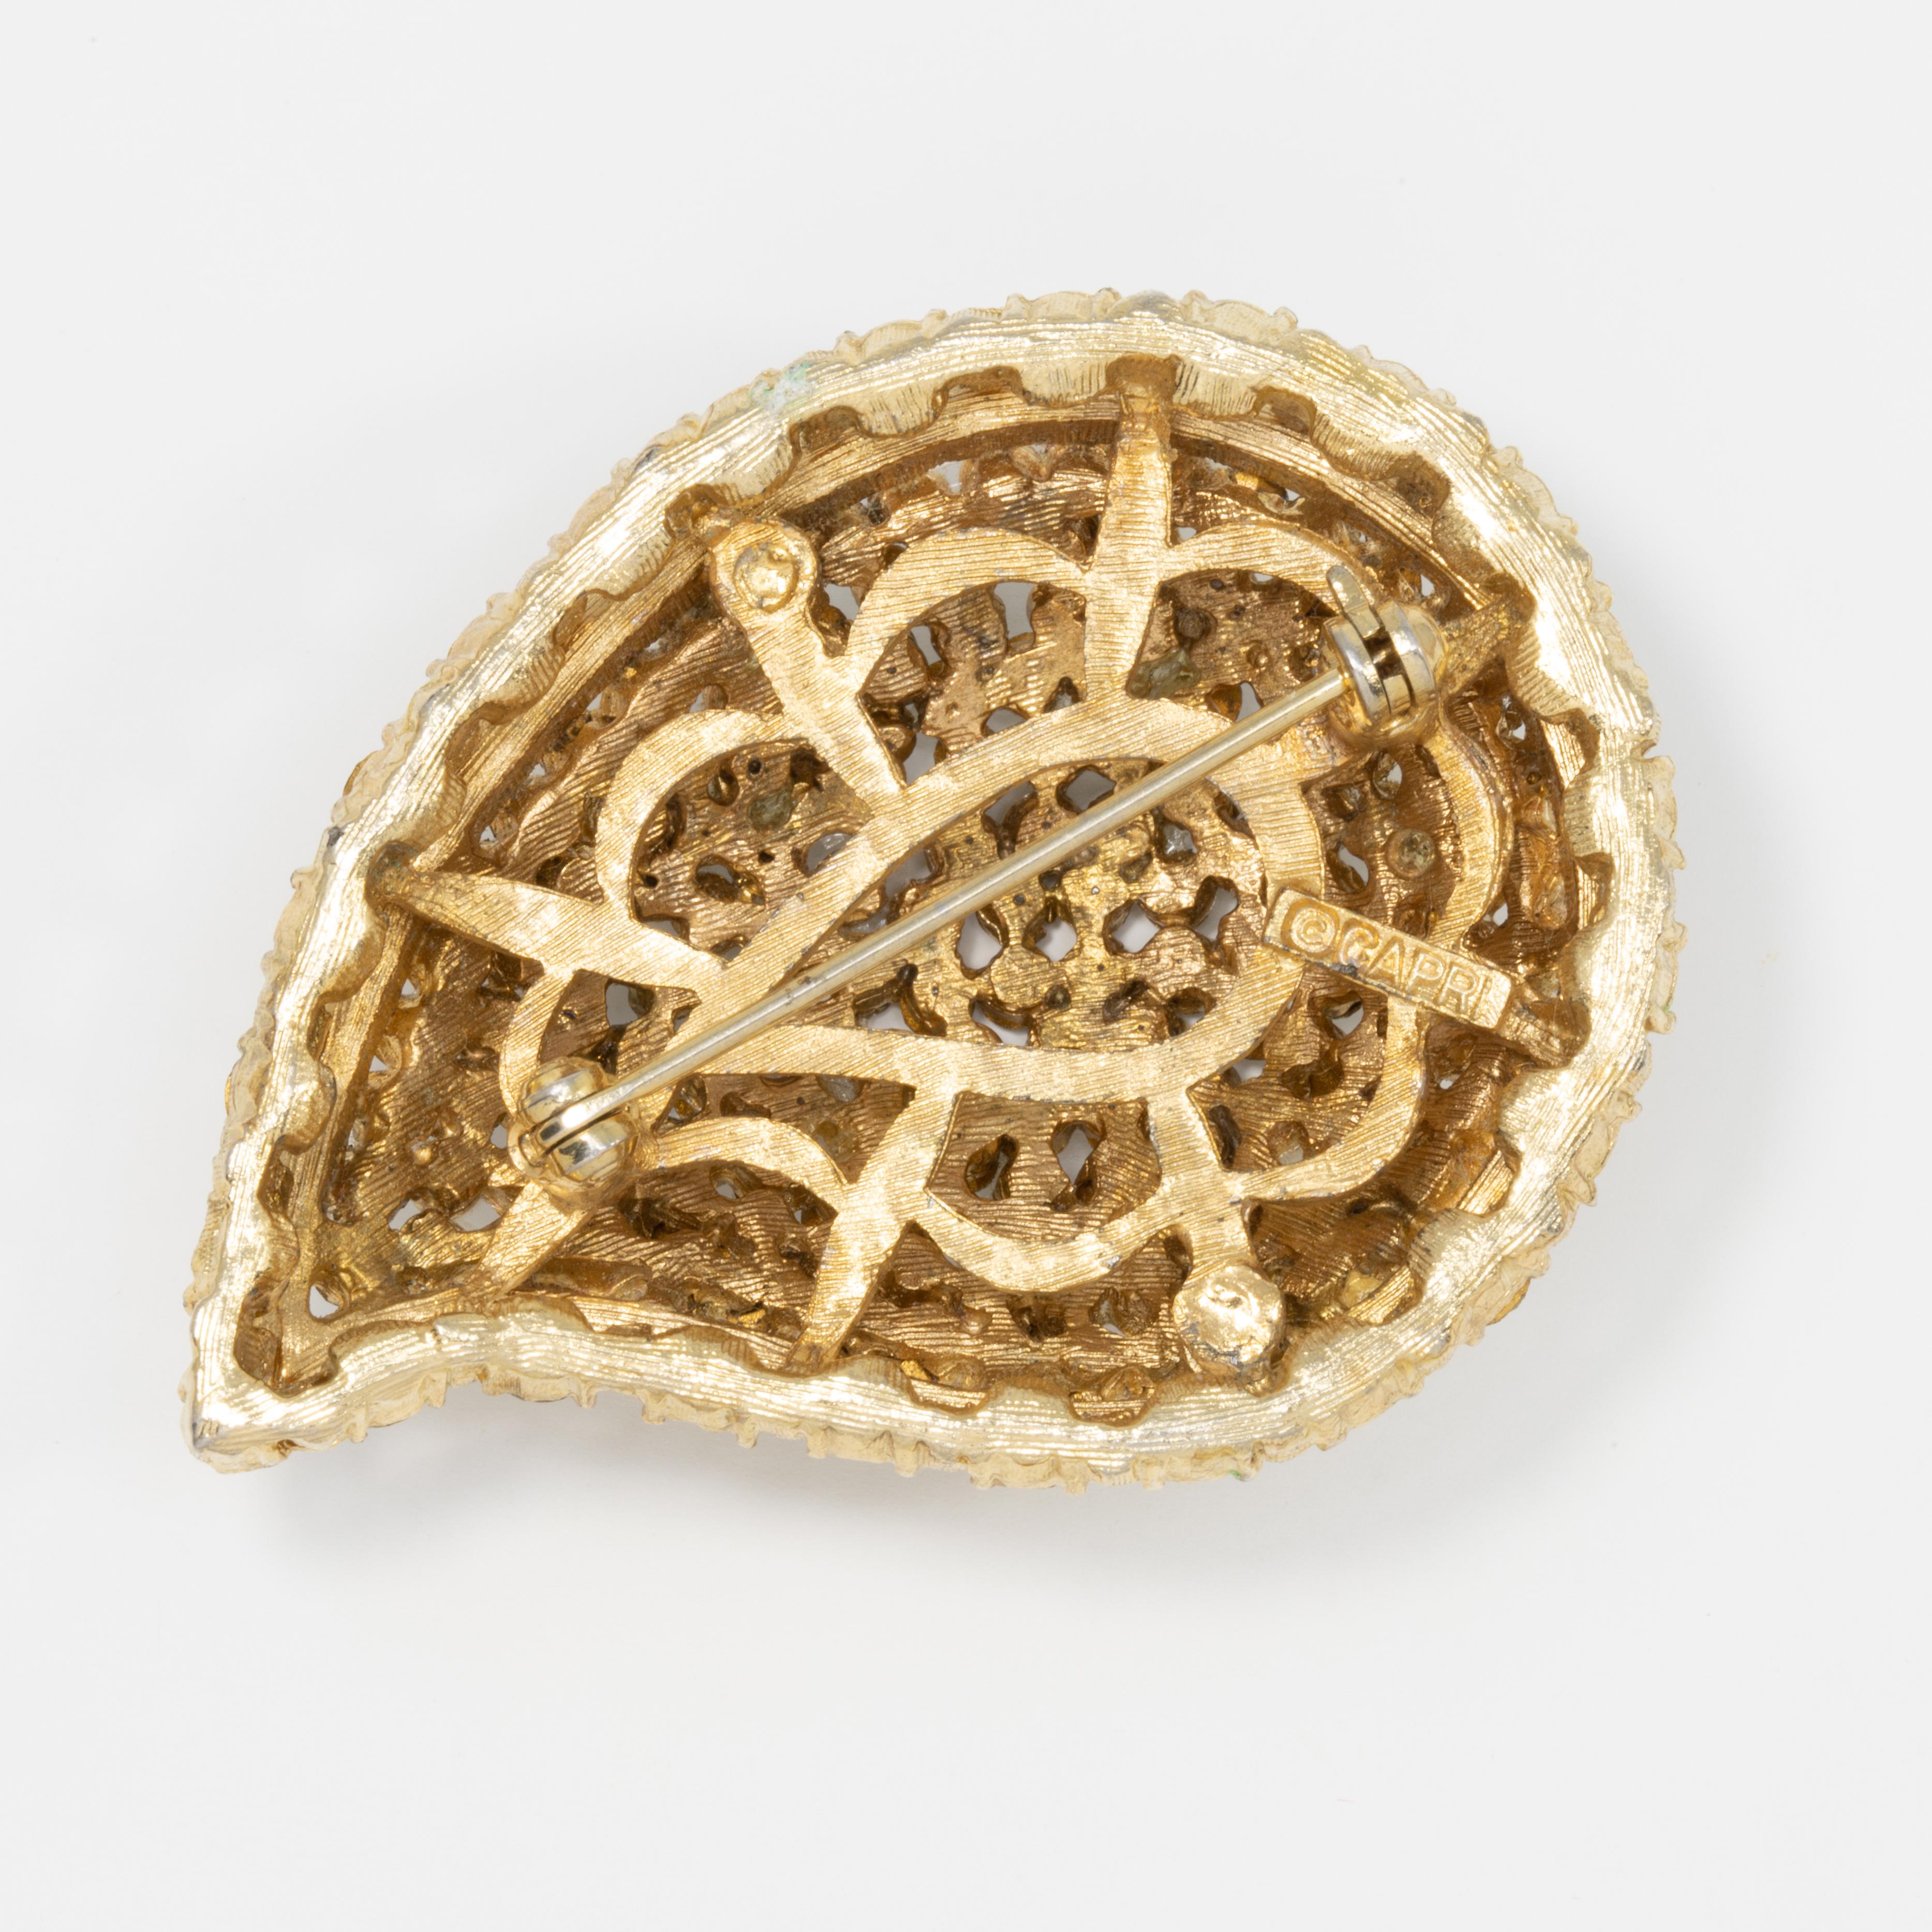 An elegant pin from mid-1900s costume jewelry designer Capri, featuring a gold-tone paisley motif decorated with clear pave crystals. Circa 1960s.

Hallmarks: Capri